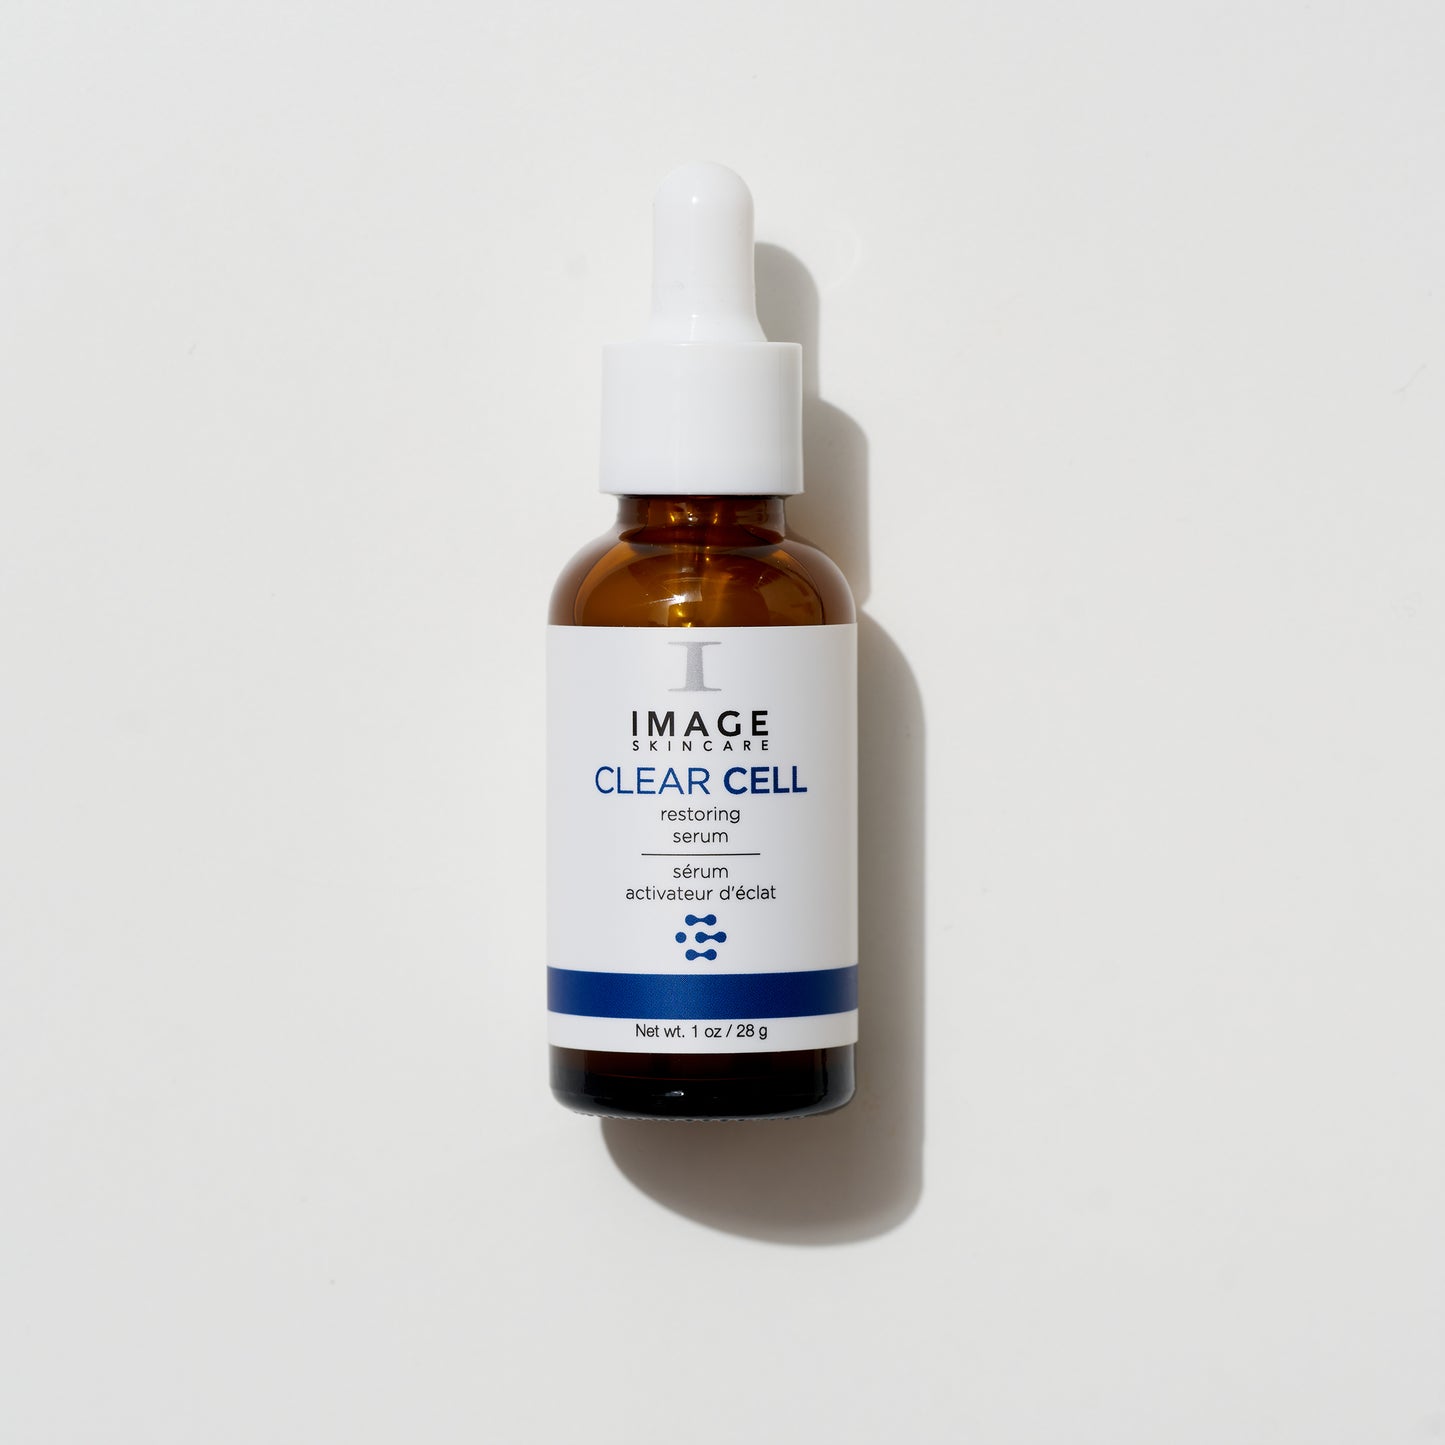 CLEAR CELL Restoring Serum, Image Skincare